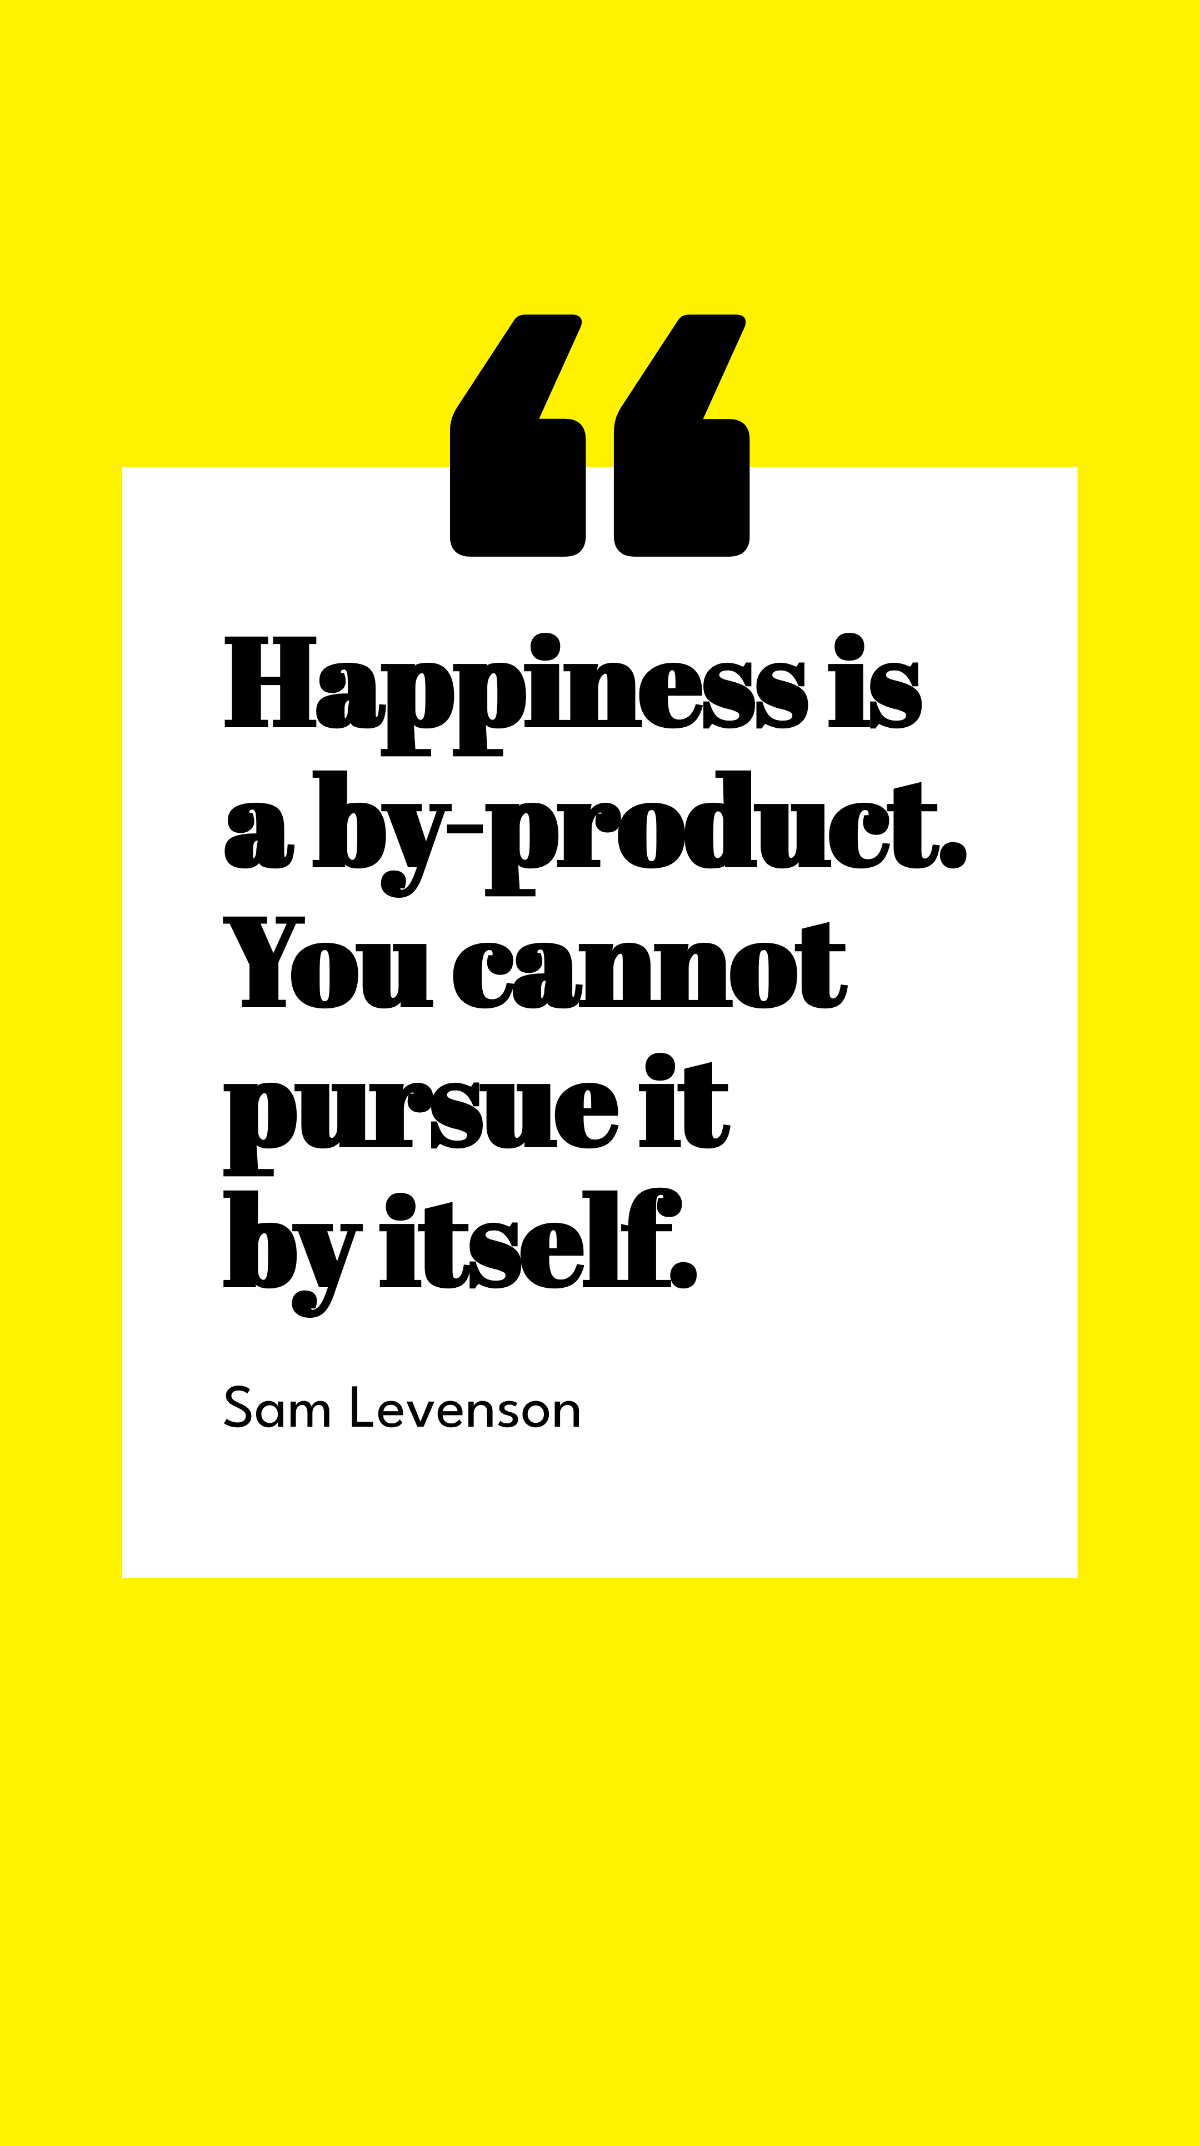 Sam Levenson - Happiness is a by-product. You cannot pursue it by itself. Template